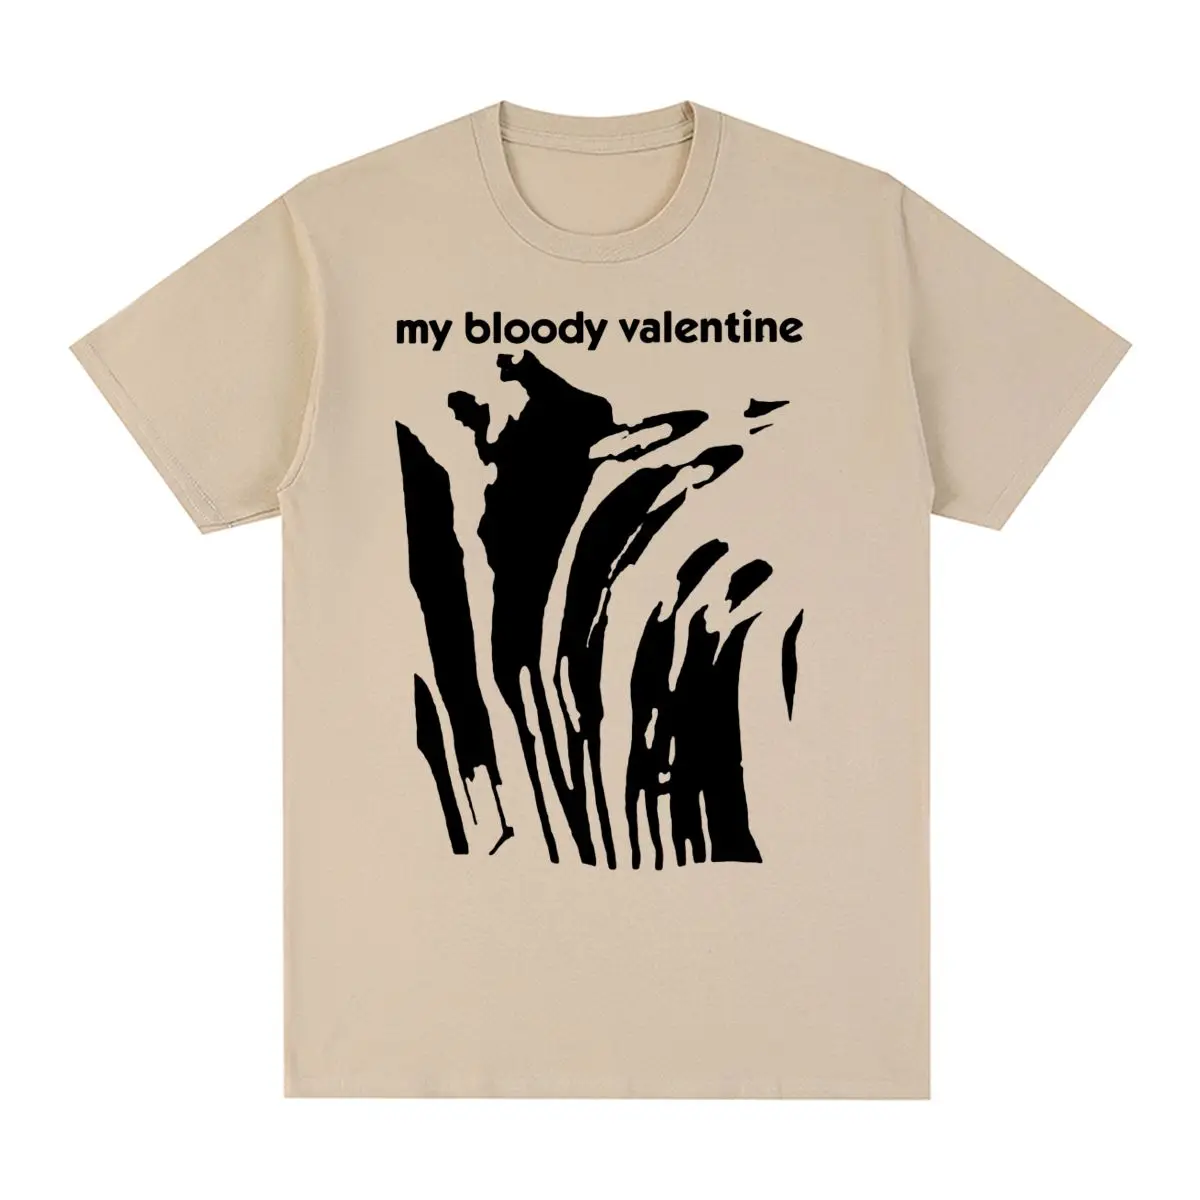 

My Bloody Valentine T-shirt Slowdive Jesus and Mary Chain Ride You Made Me Realise Cotton Men T shirt New Tee Tshirt Womens Tops